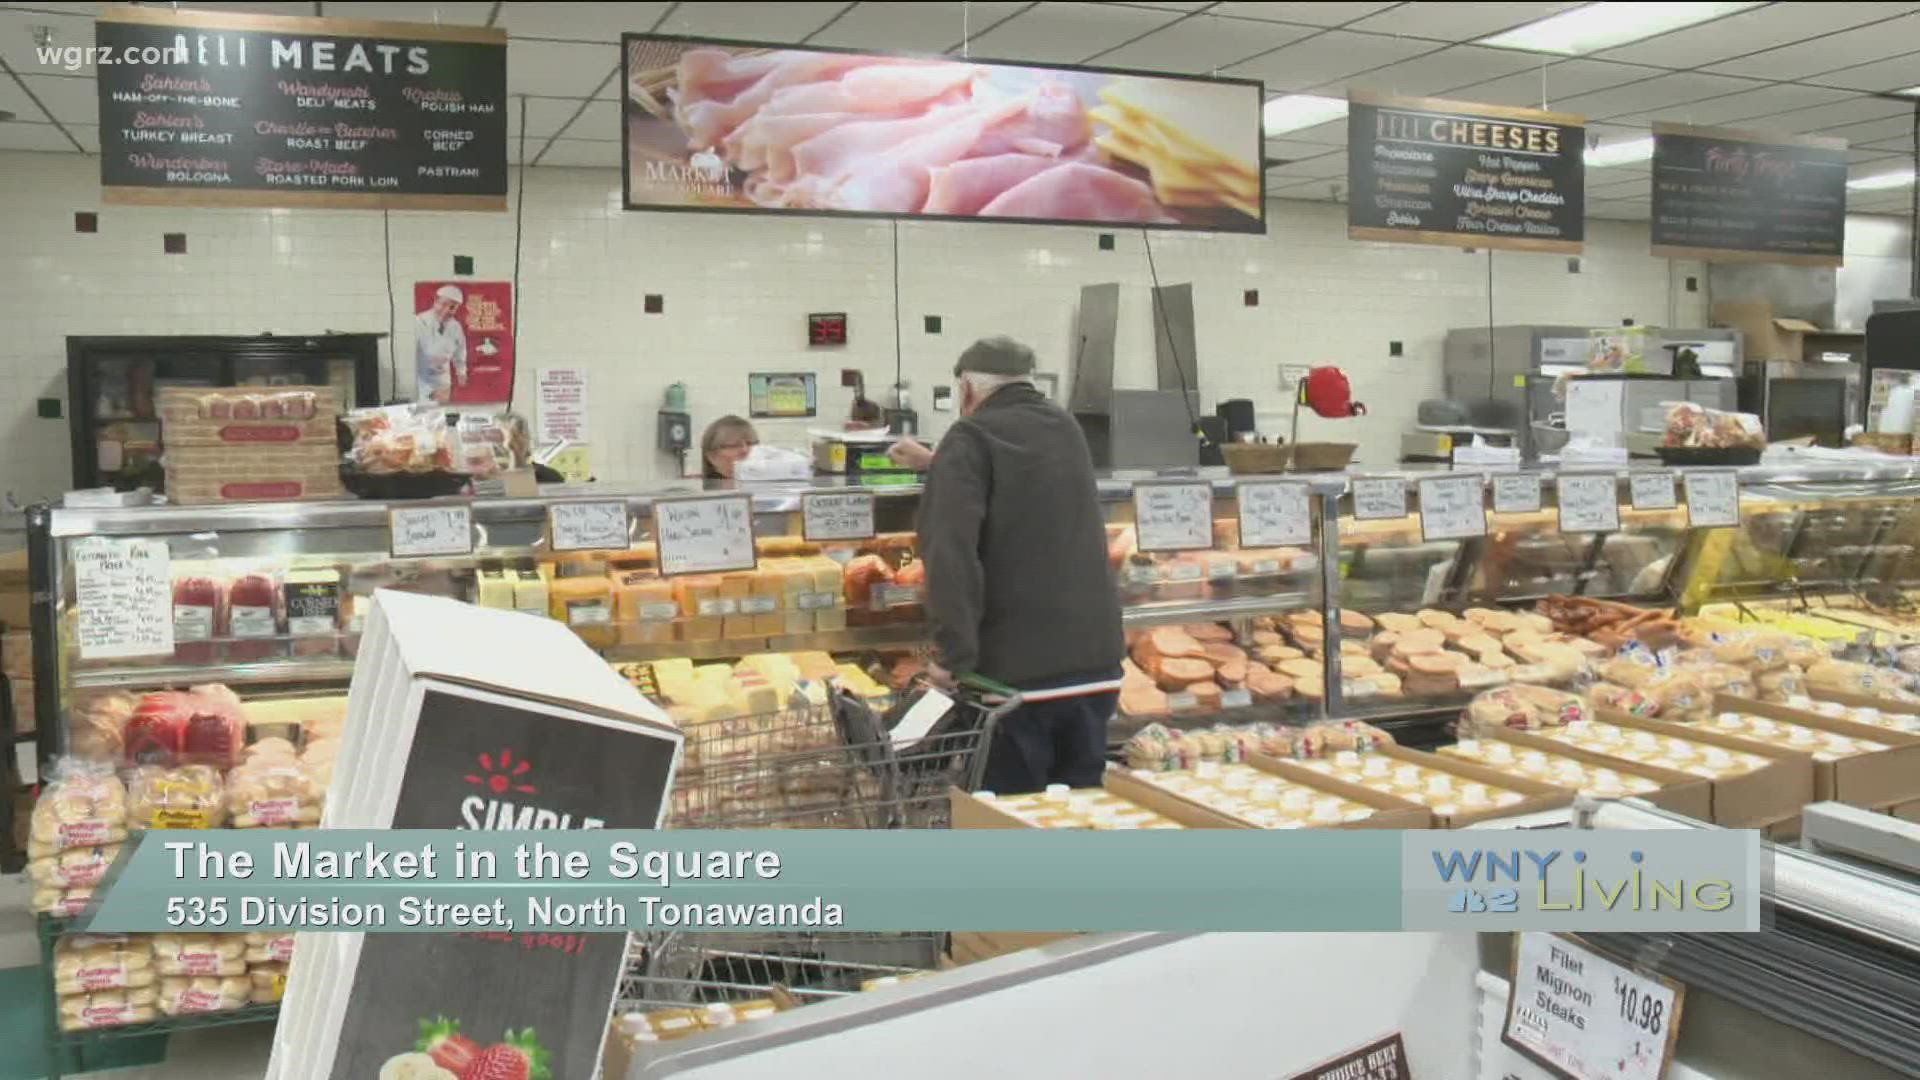 WNY Living - November 27 - The Market in the Square (THIS VIDEO IS SPONSORED BY THE MARKET IN THE SQUARE)